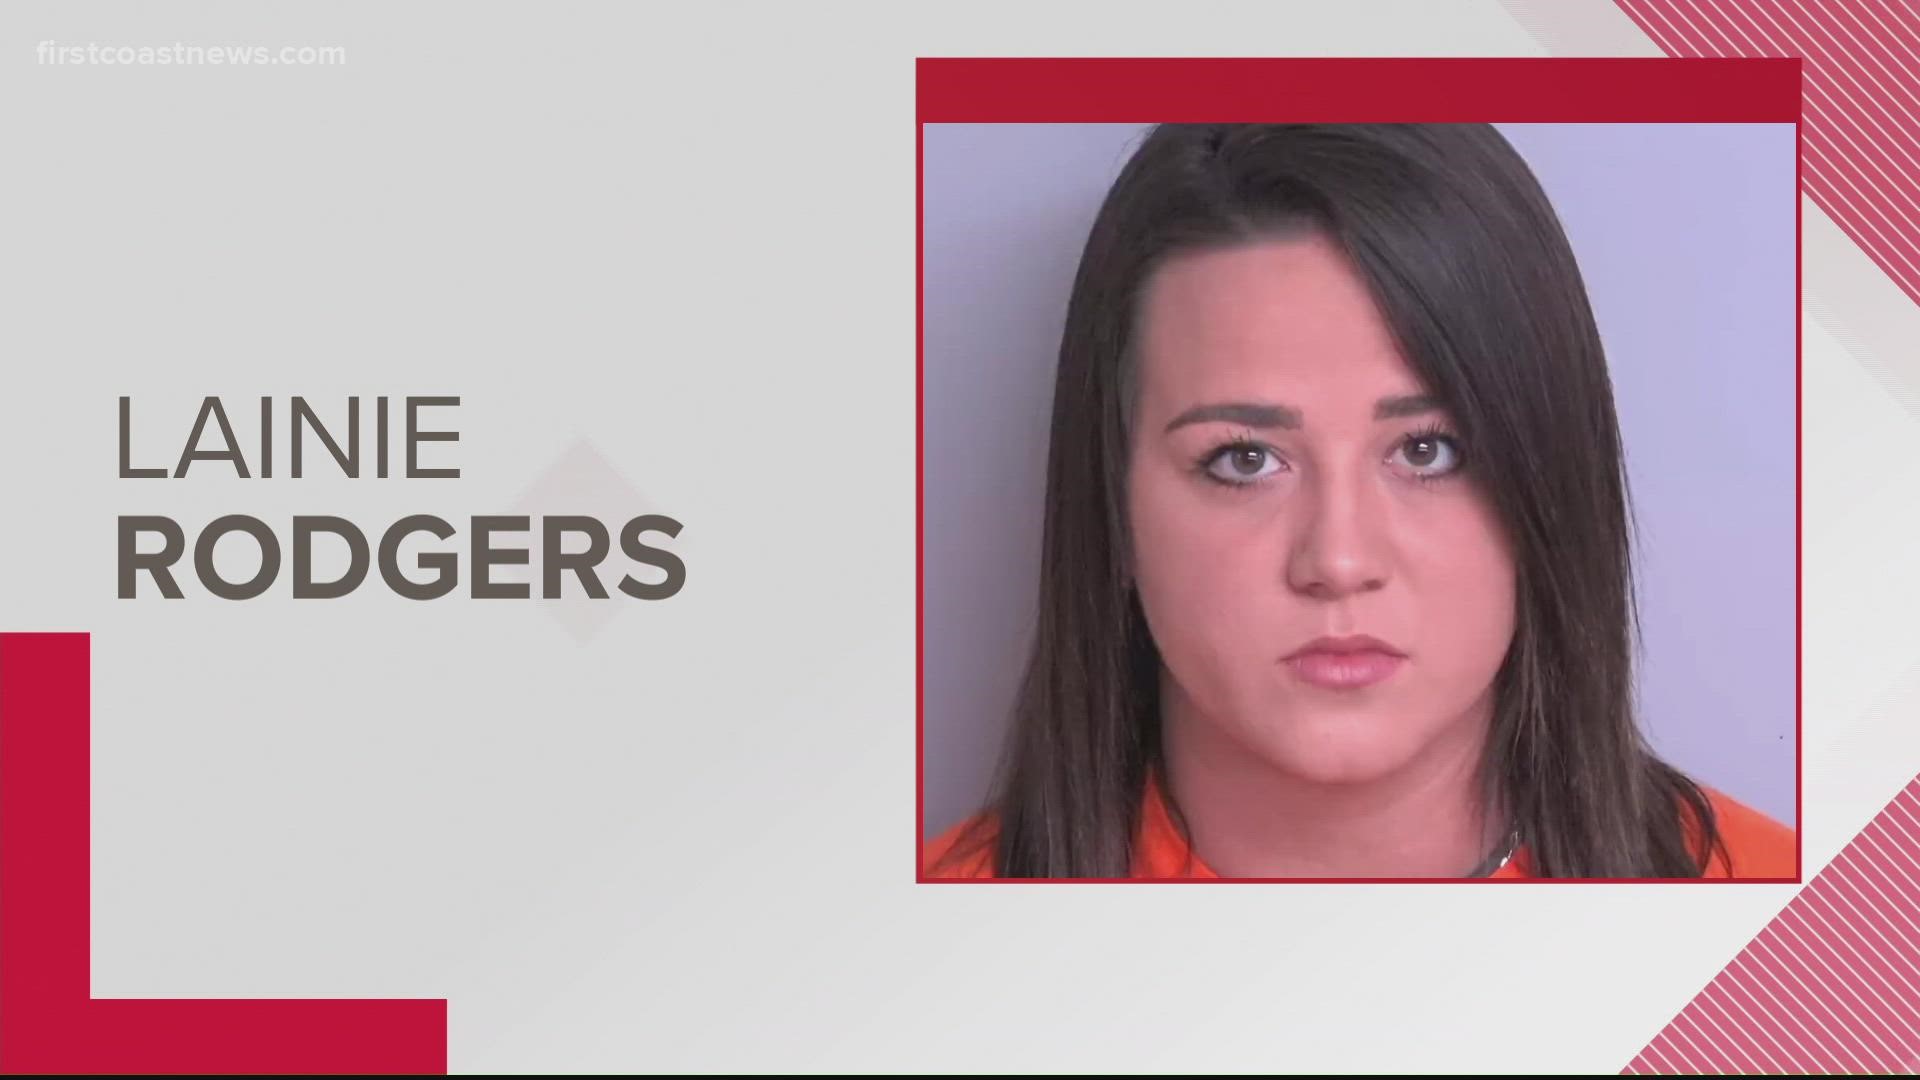 The sheriff's office says 24-year-old Lainie Rodgers admitted to sending sexually explicit text messages to the student's phone.